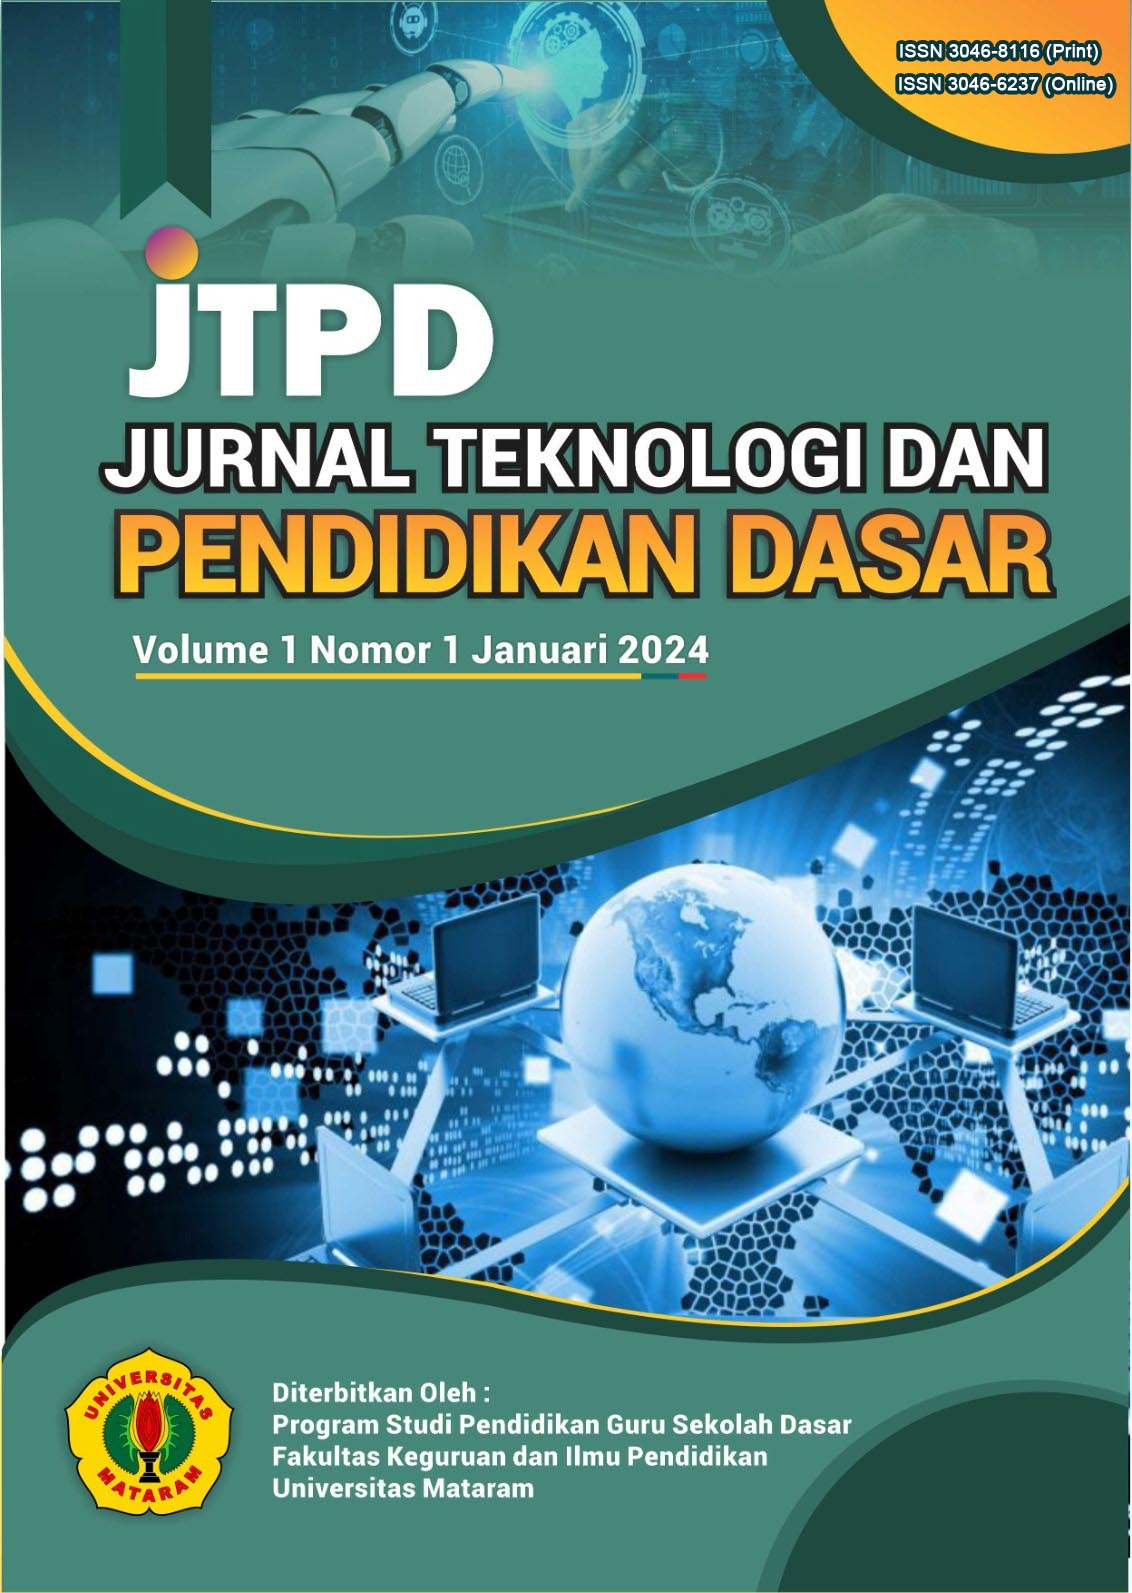 Jurnal Teknologi dan Pendidikan Dasar (JTPD) is a platform for publishing articles resulting from research, development, and literature studies in the field of technology and elementary education published by the Elementary Education Study Program, Faculty of Teacher Training and Education, Universitas Mataram. This journal focuses on the fields of technology and elementary education. The technology field includes learning media, learning media development, online learning, learning management systems, e-learning, and technology -ntegrated learning. . The field of elementary education includes elementary education learning models, learning evaluation in elementary education, learning strategies, character education in elementary education, thematic learning, inclusive education, and main subject education at the elementary education level (science, social studies, language, citizenship, mathematics, religious education, and arts and culture). TJurnal Teknologi dan Pendidikan Dasar (JTPD) is published every six months, namely January and July. 